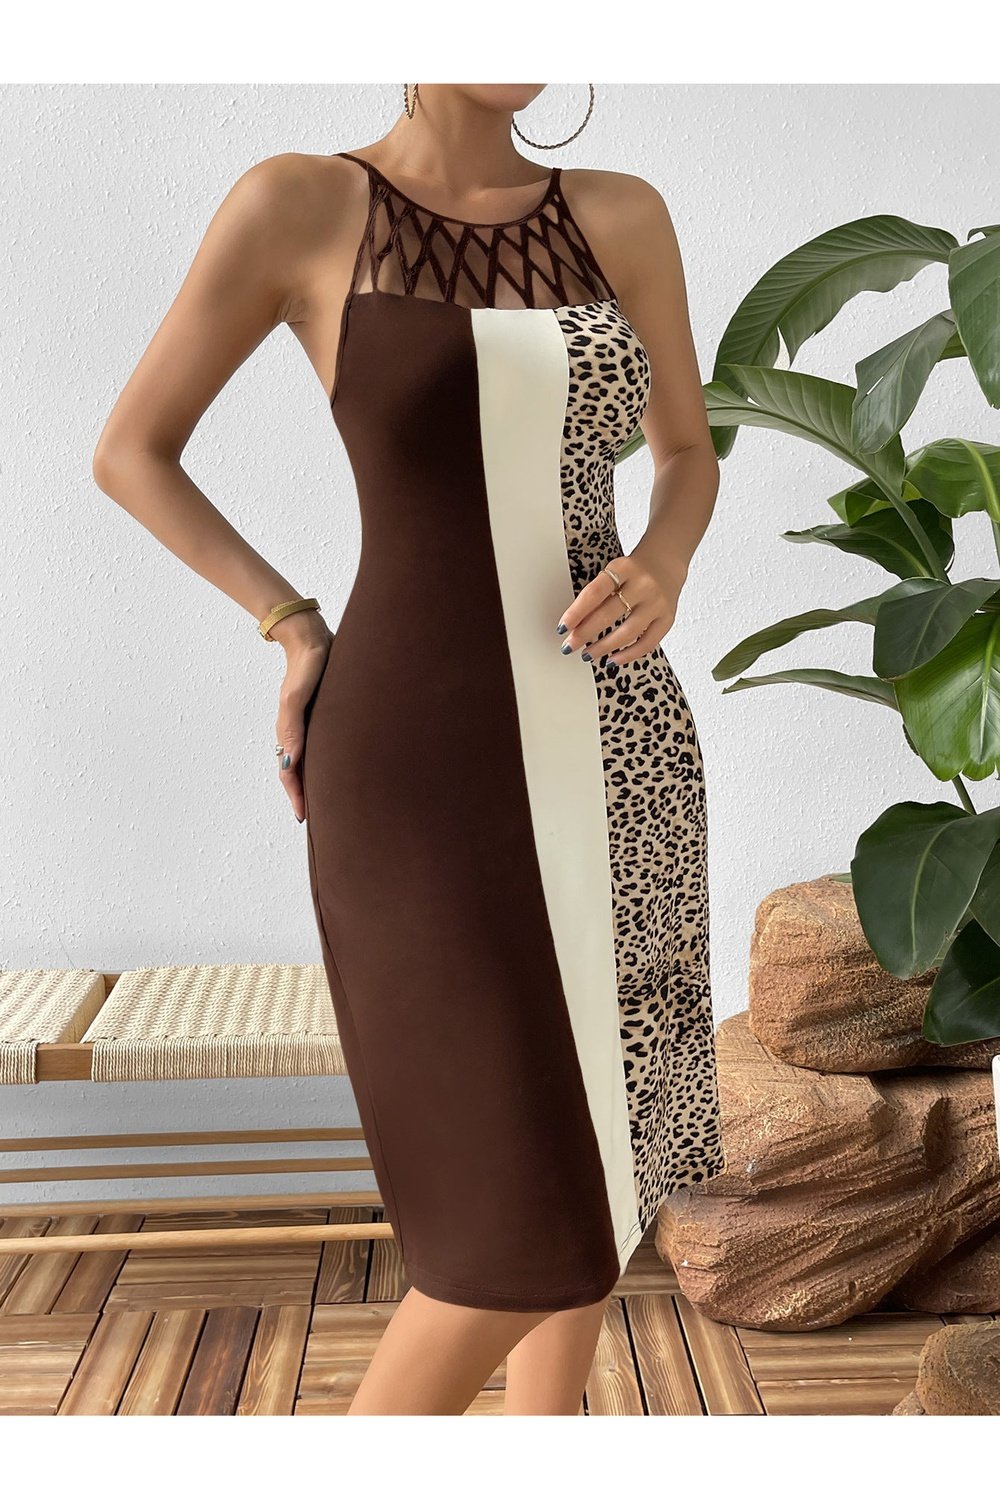 Leopard Color Block Cutout Sleeveless Knee-Length Dress - Casual & Maxi Dresses - FITGGINS